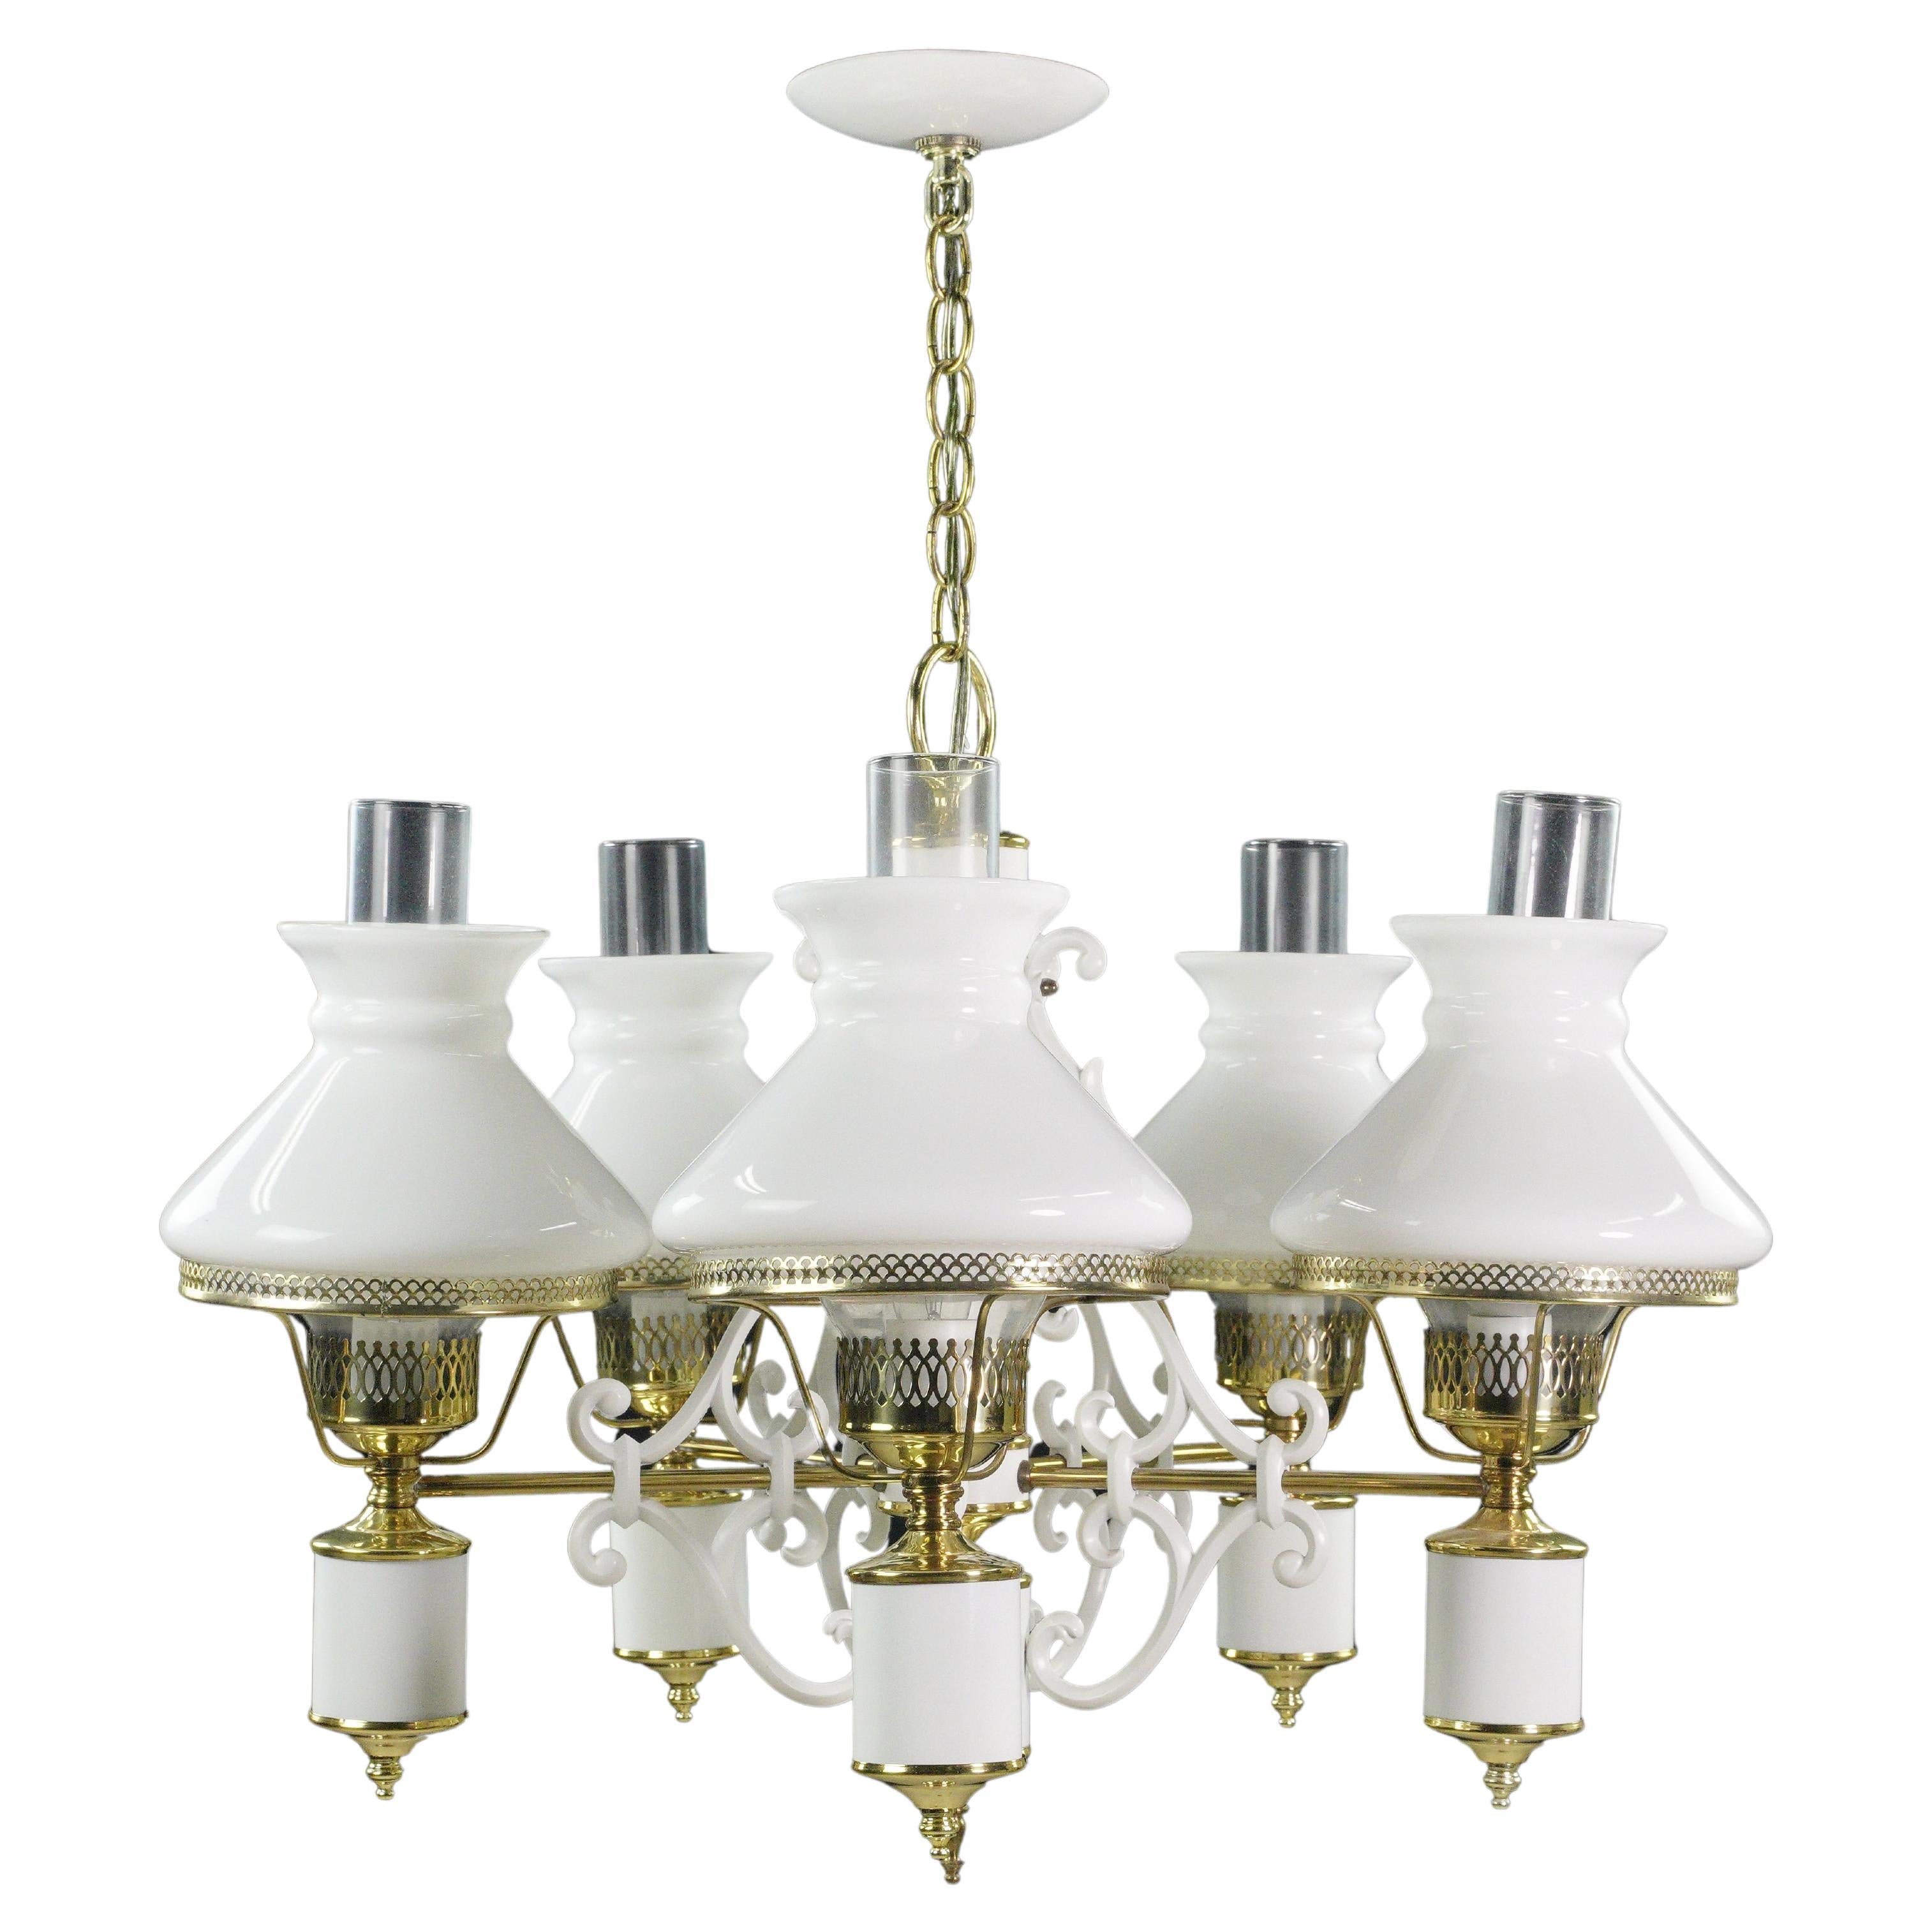 5 Arm White Glass Shades Steel Aluminum Chandelier For Sale